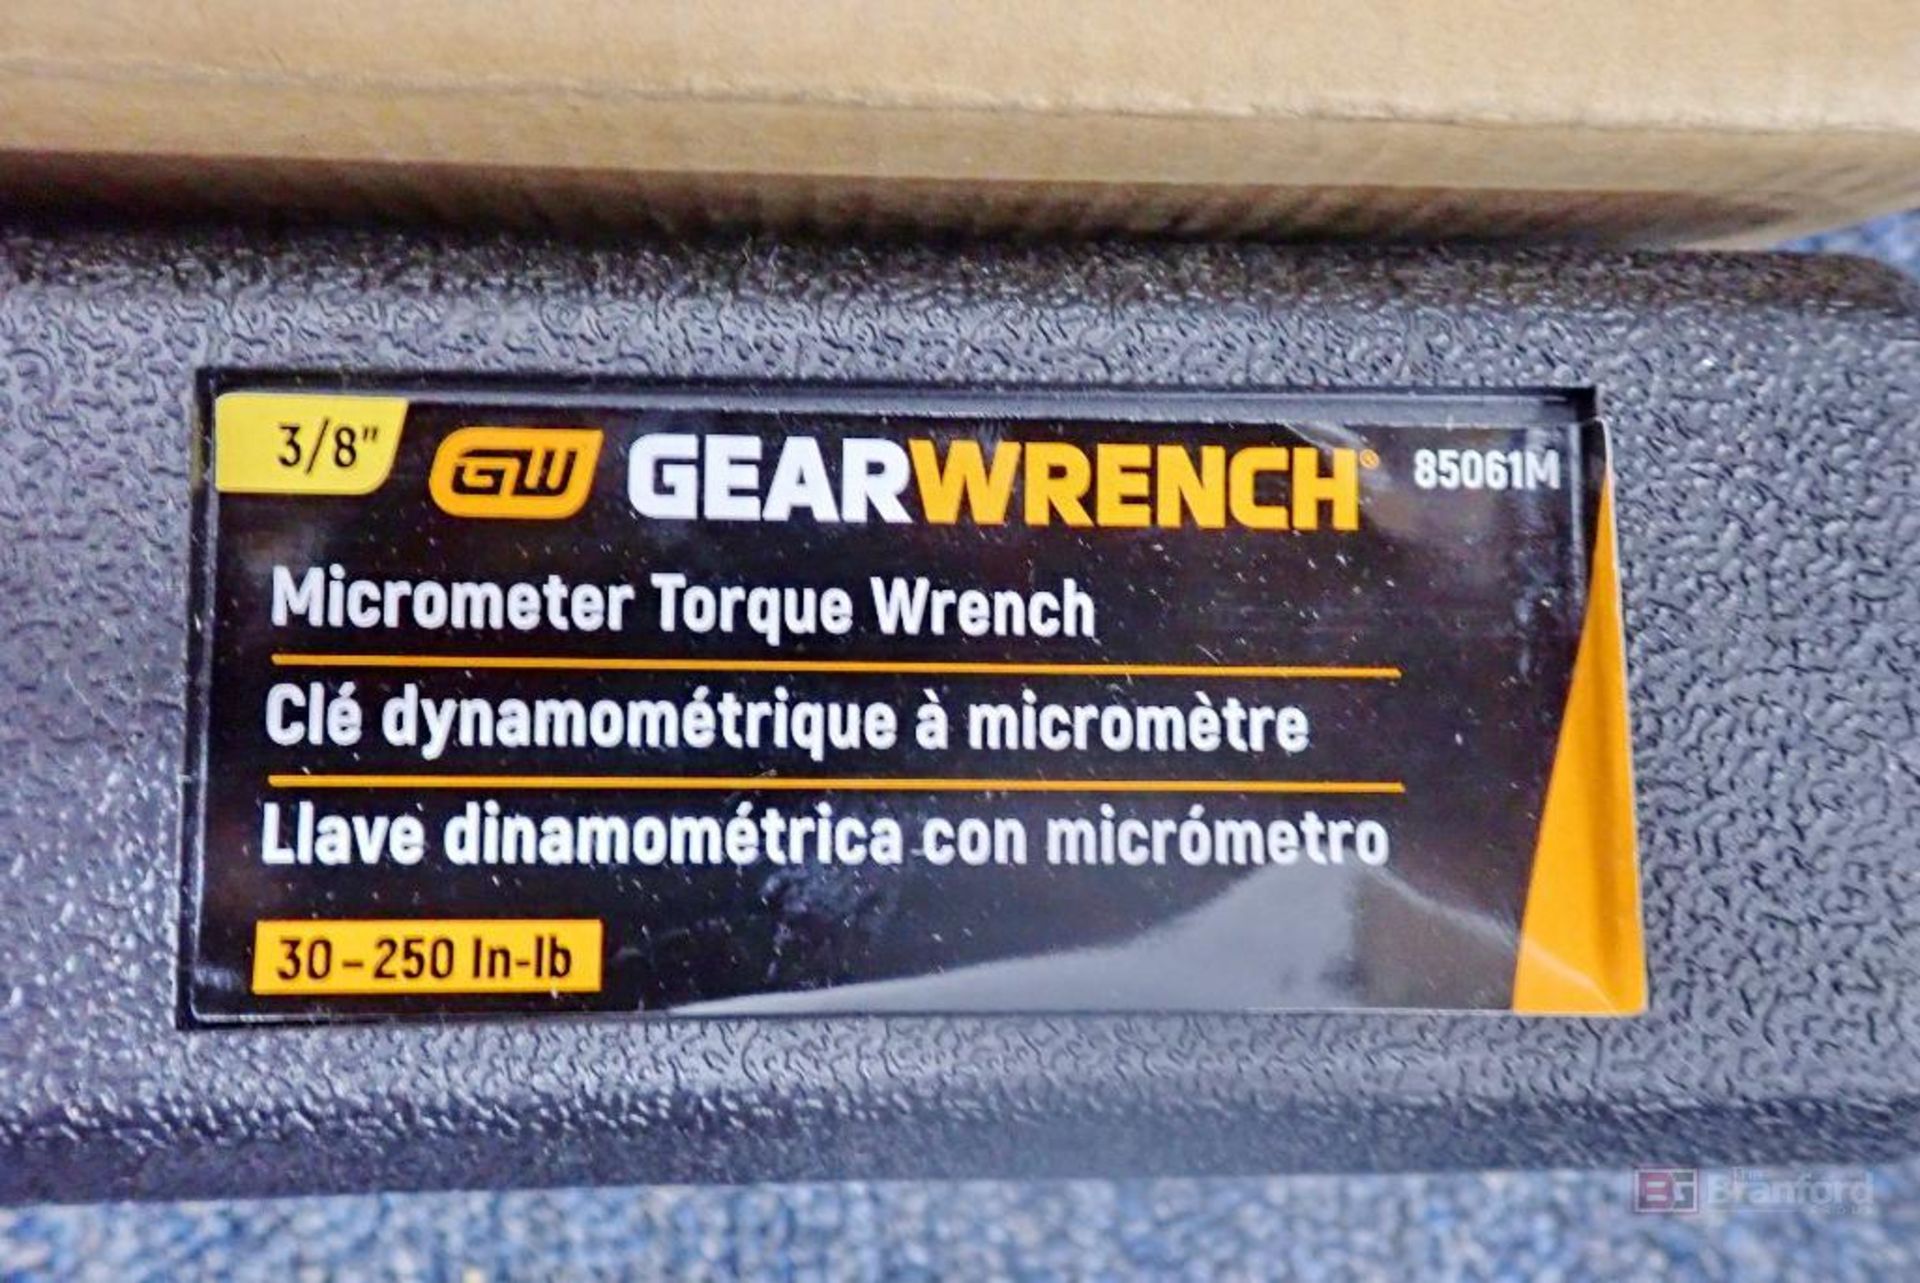 GearWrench 85061M (8858175) 3/8" Drive Micrometer Torque Wrench - Image 2 of 3